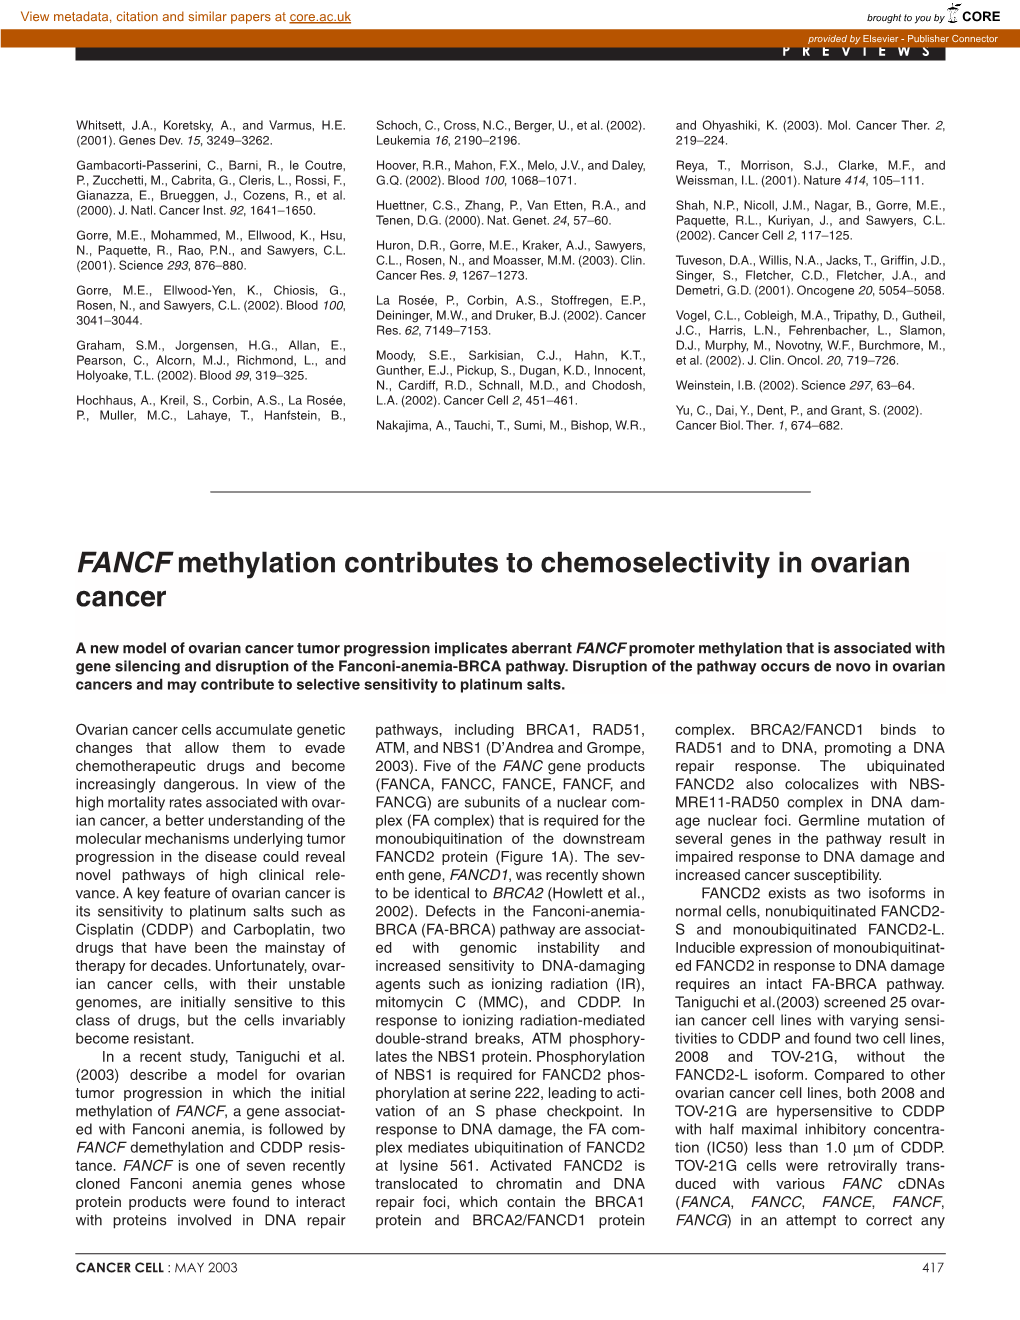 FANCF Methylation Contributes to Chemoselectivity in Ovarian Cancer